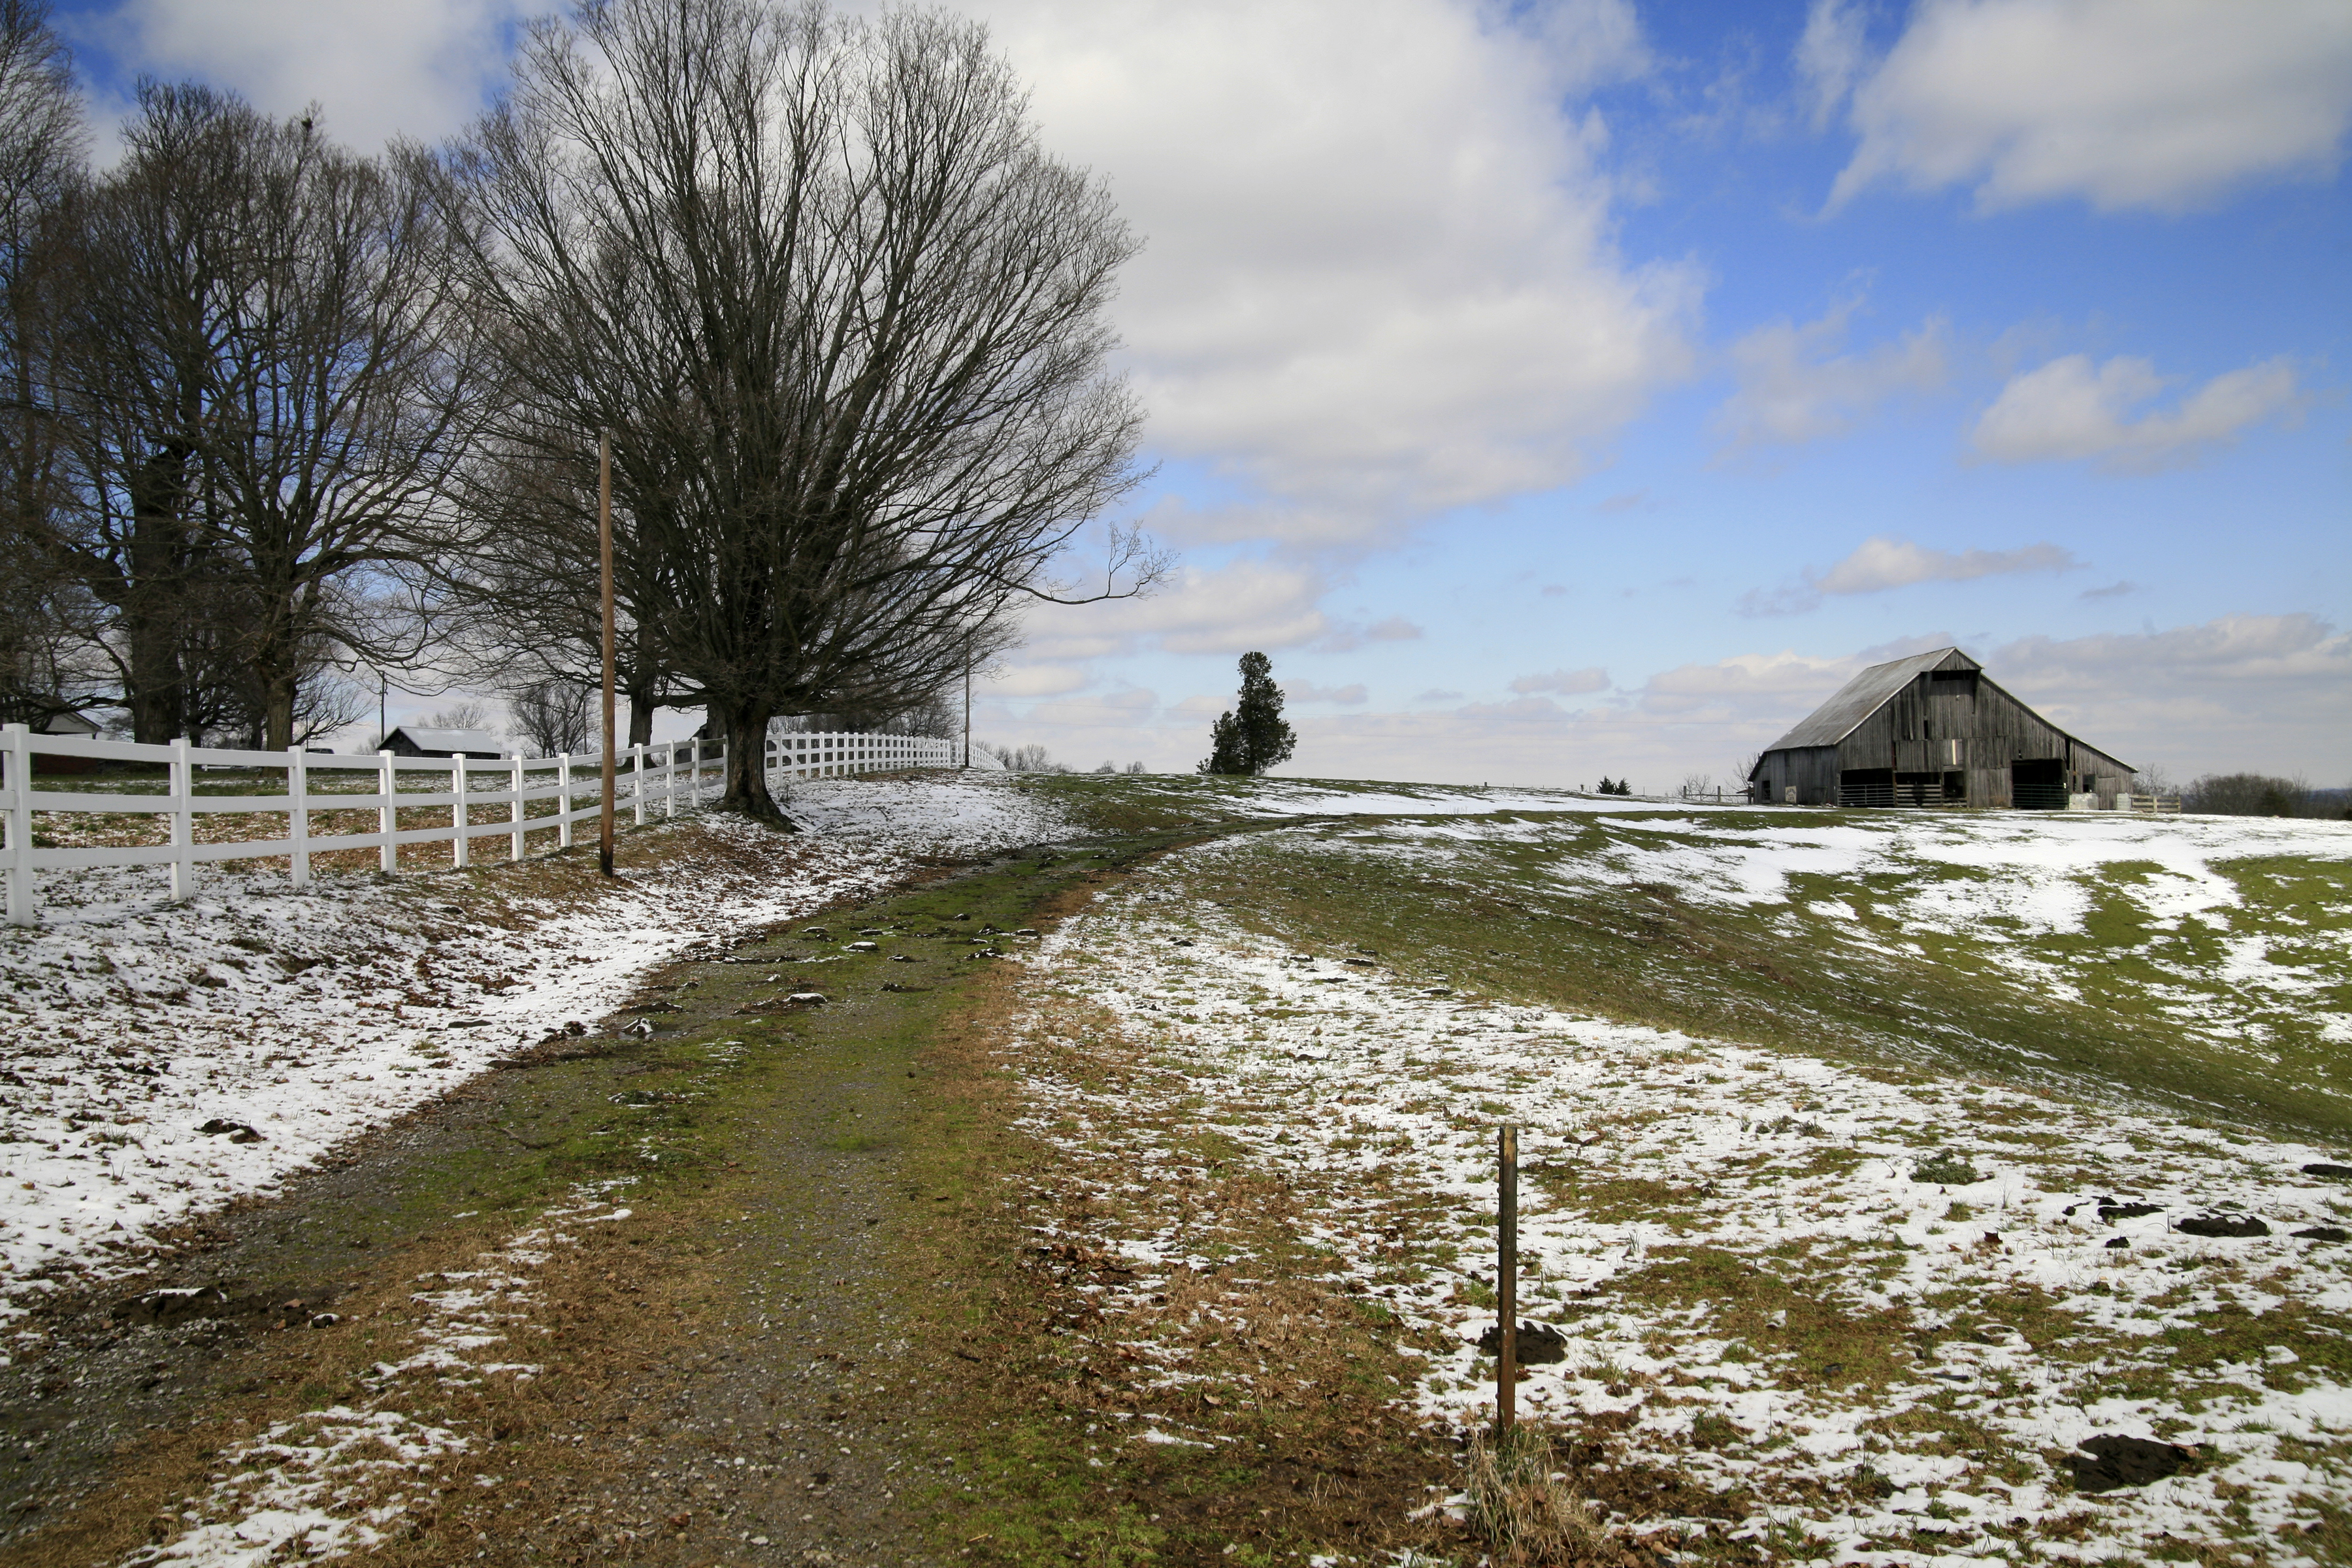 Late winter in rural Tennessee - BCBST News Center